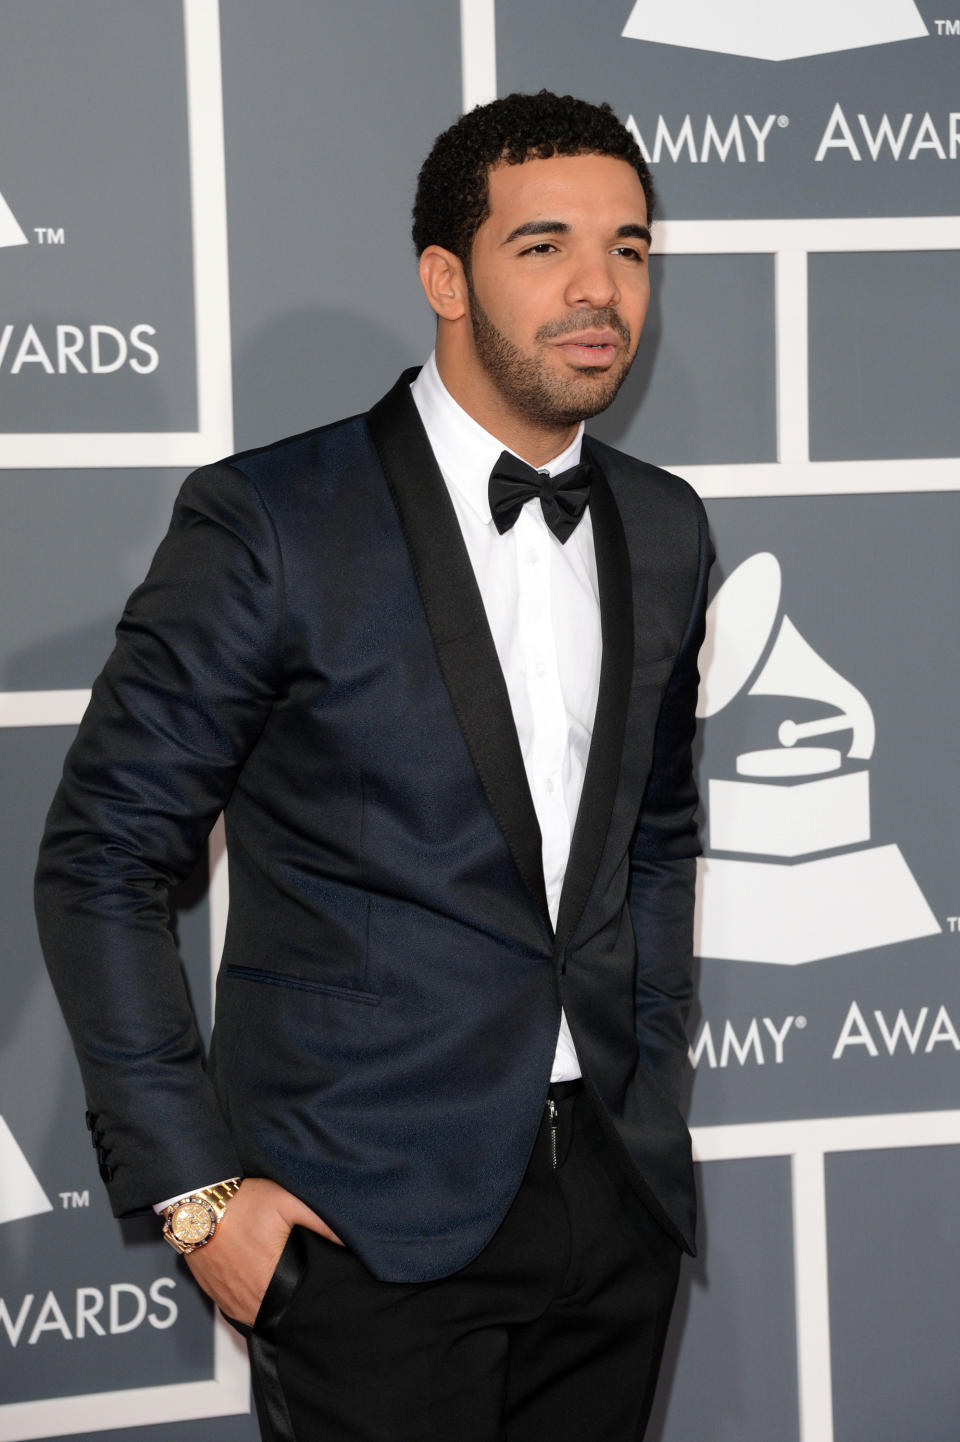 LOS ANGELES, CA - FEBRUARY 10:  Rapper Drake arrives at the 55th Annual GRAMMY Awards at Staples Center on February 10, 2013 in Los Angeles, California.  (Photo by Jason Merritt/Getty Images)